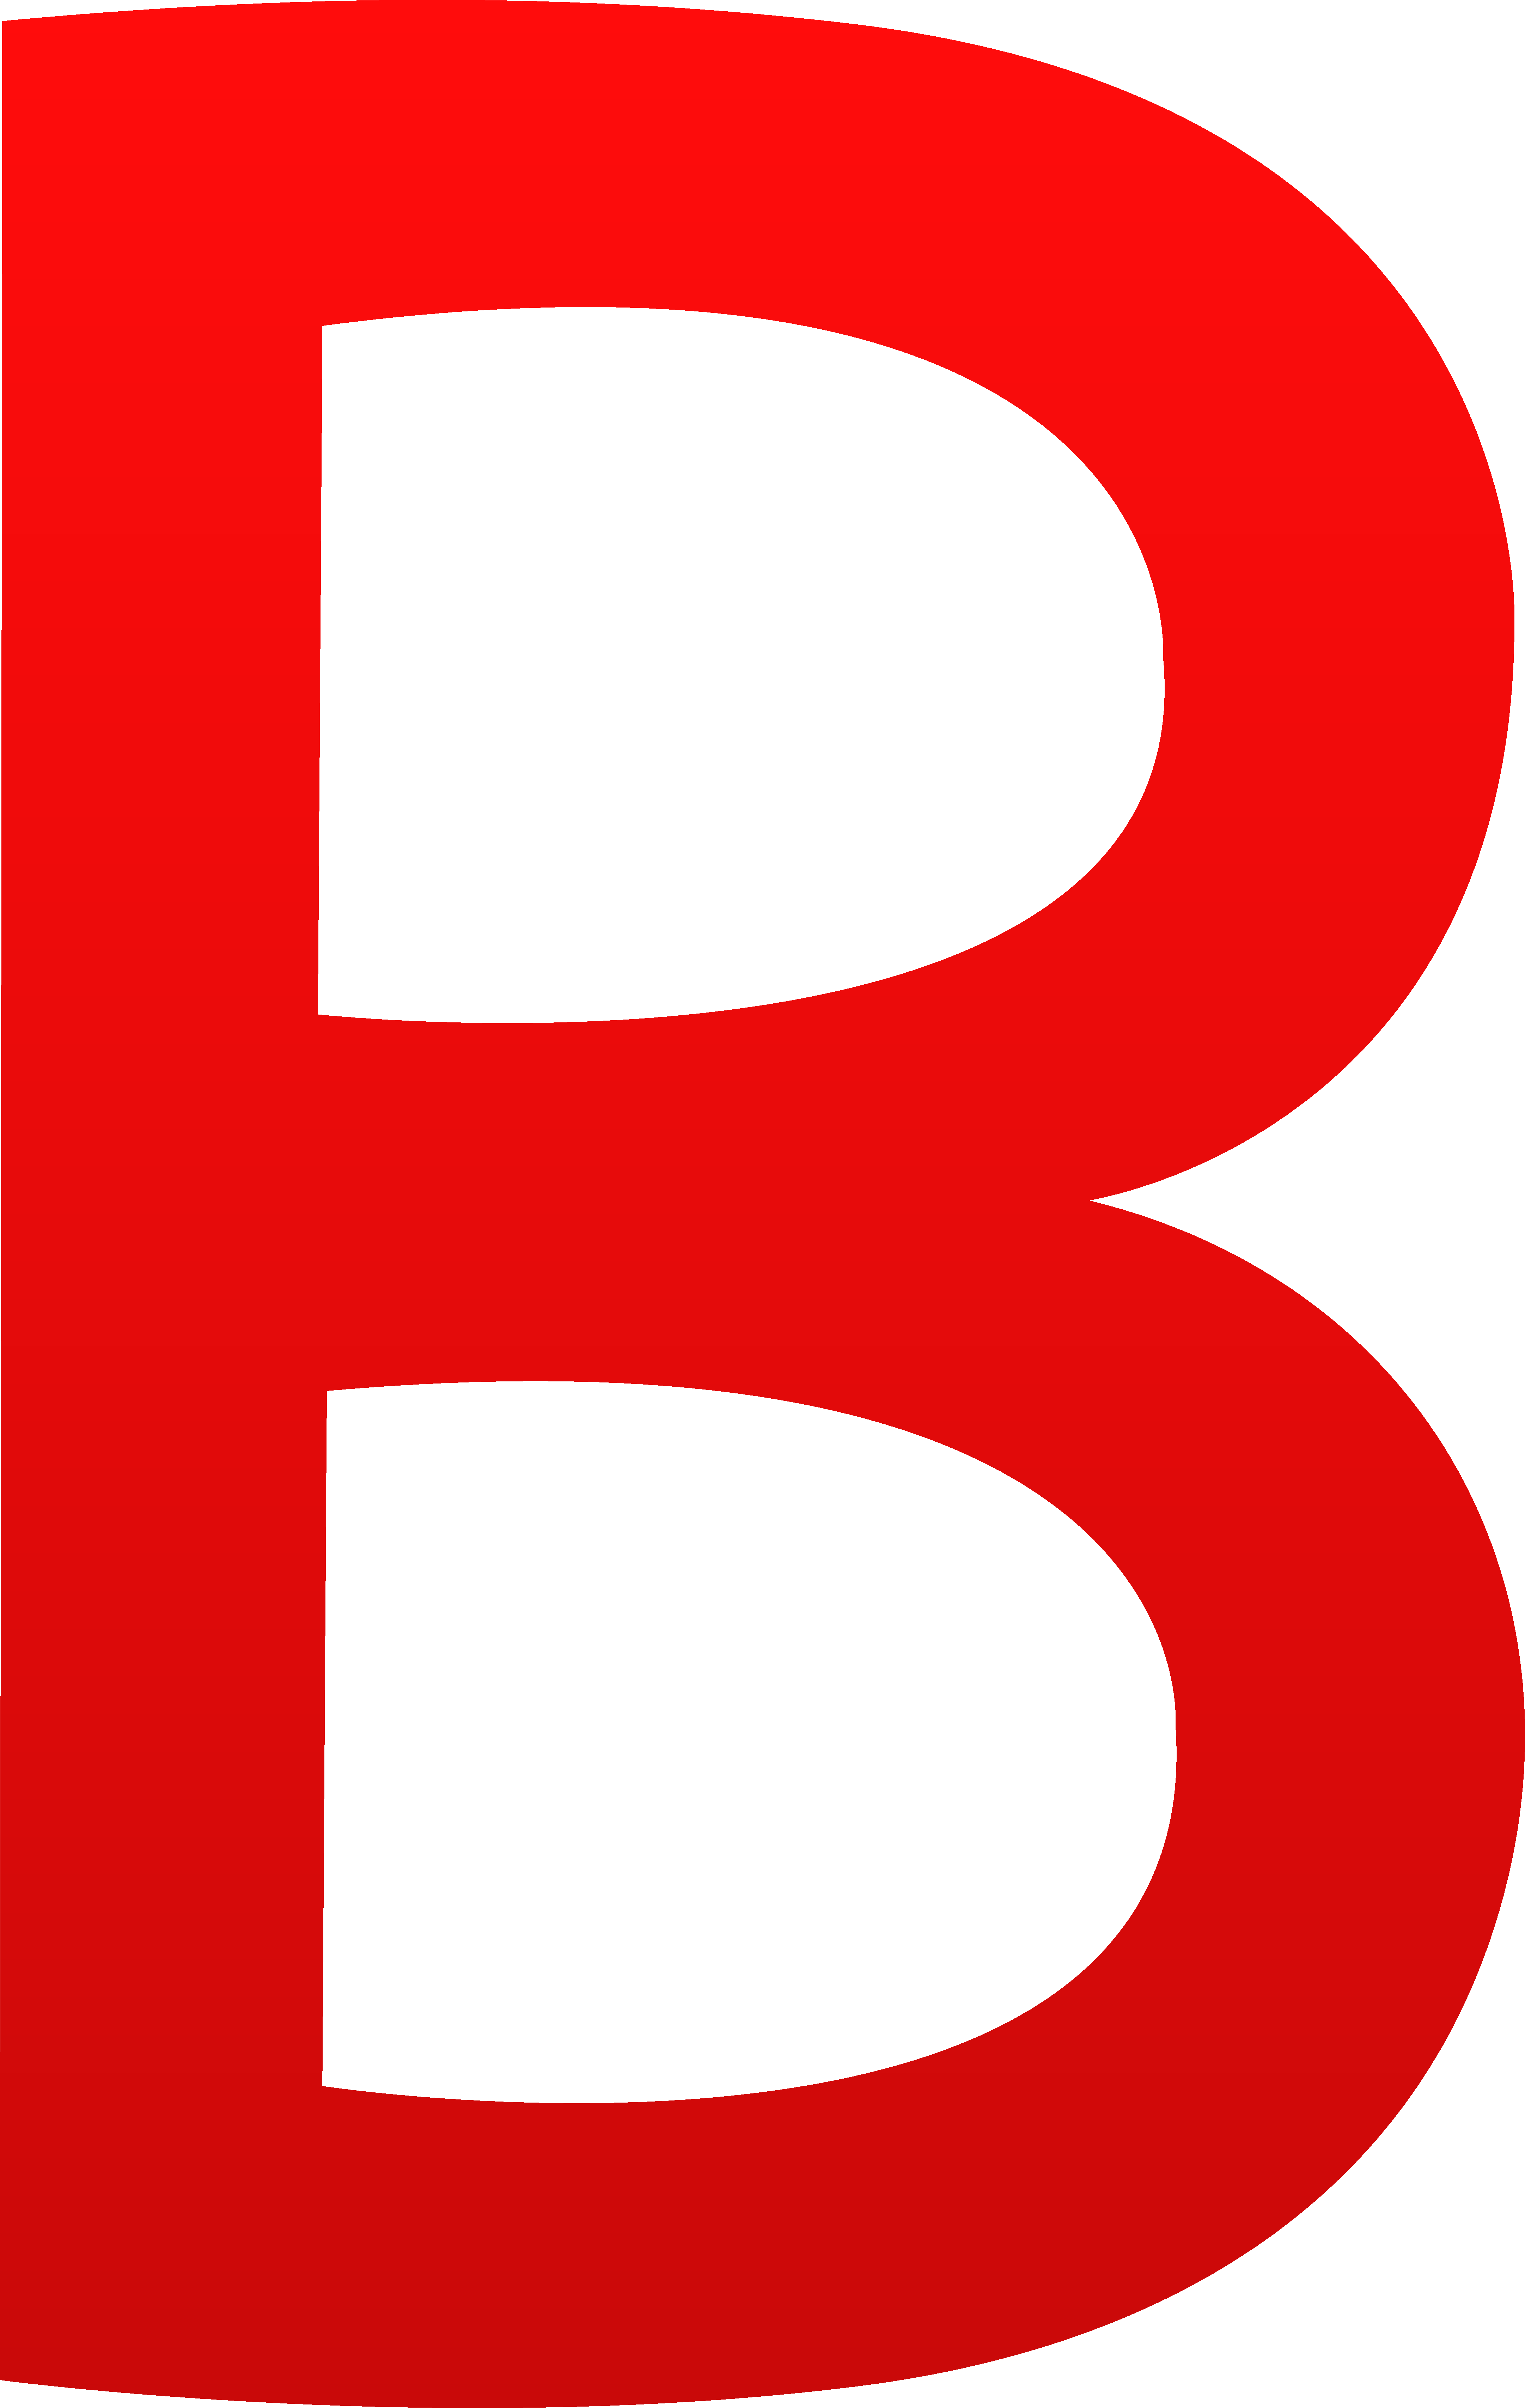 Letter B in Red Circle Logo - Letter b clip art - RR collections